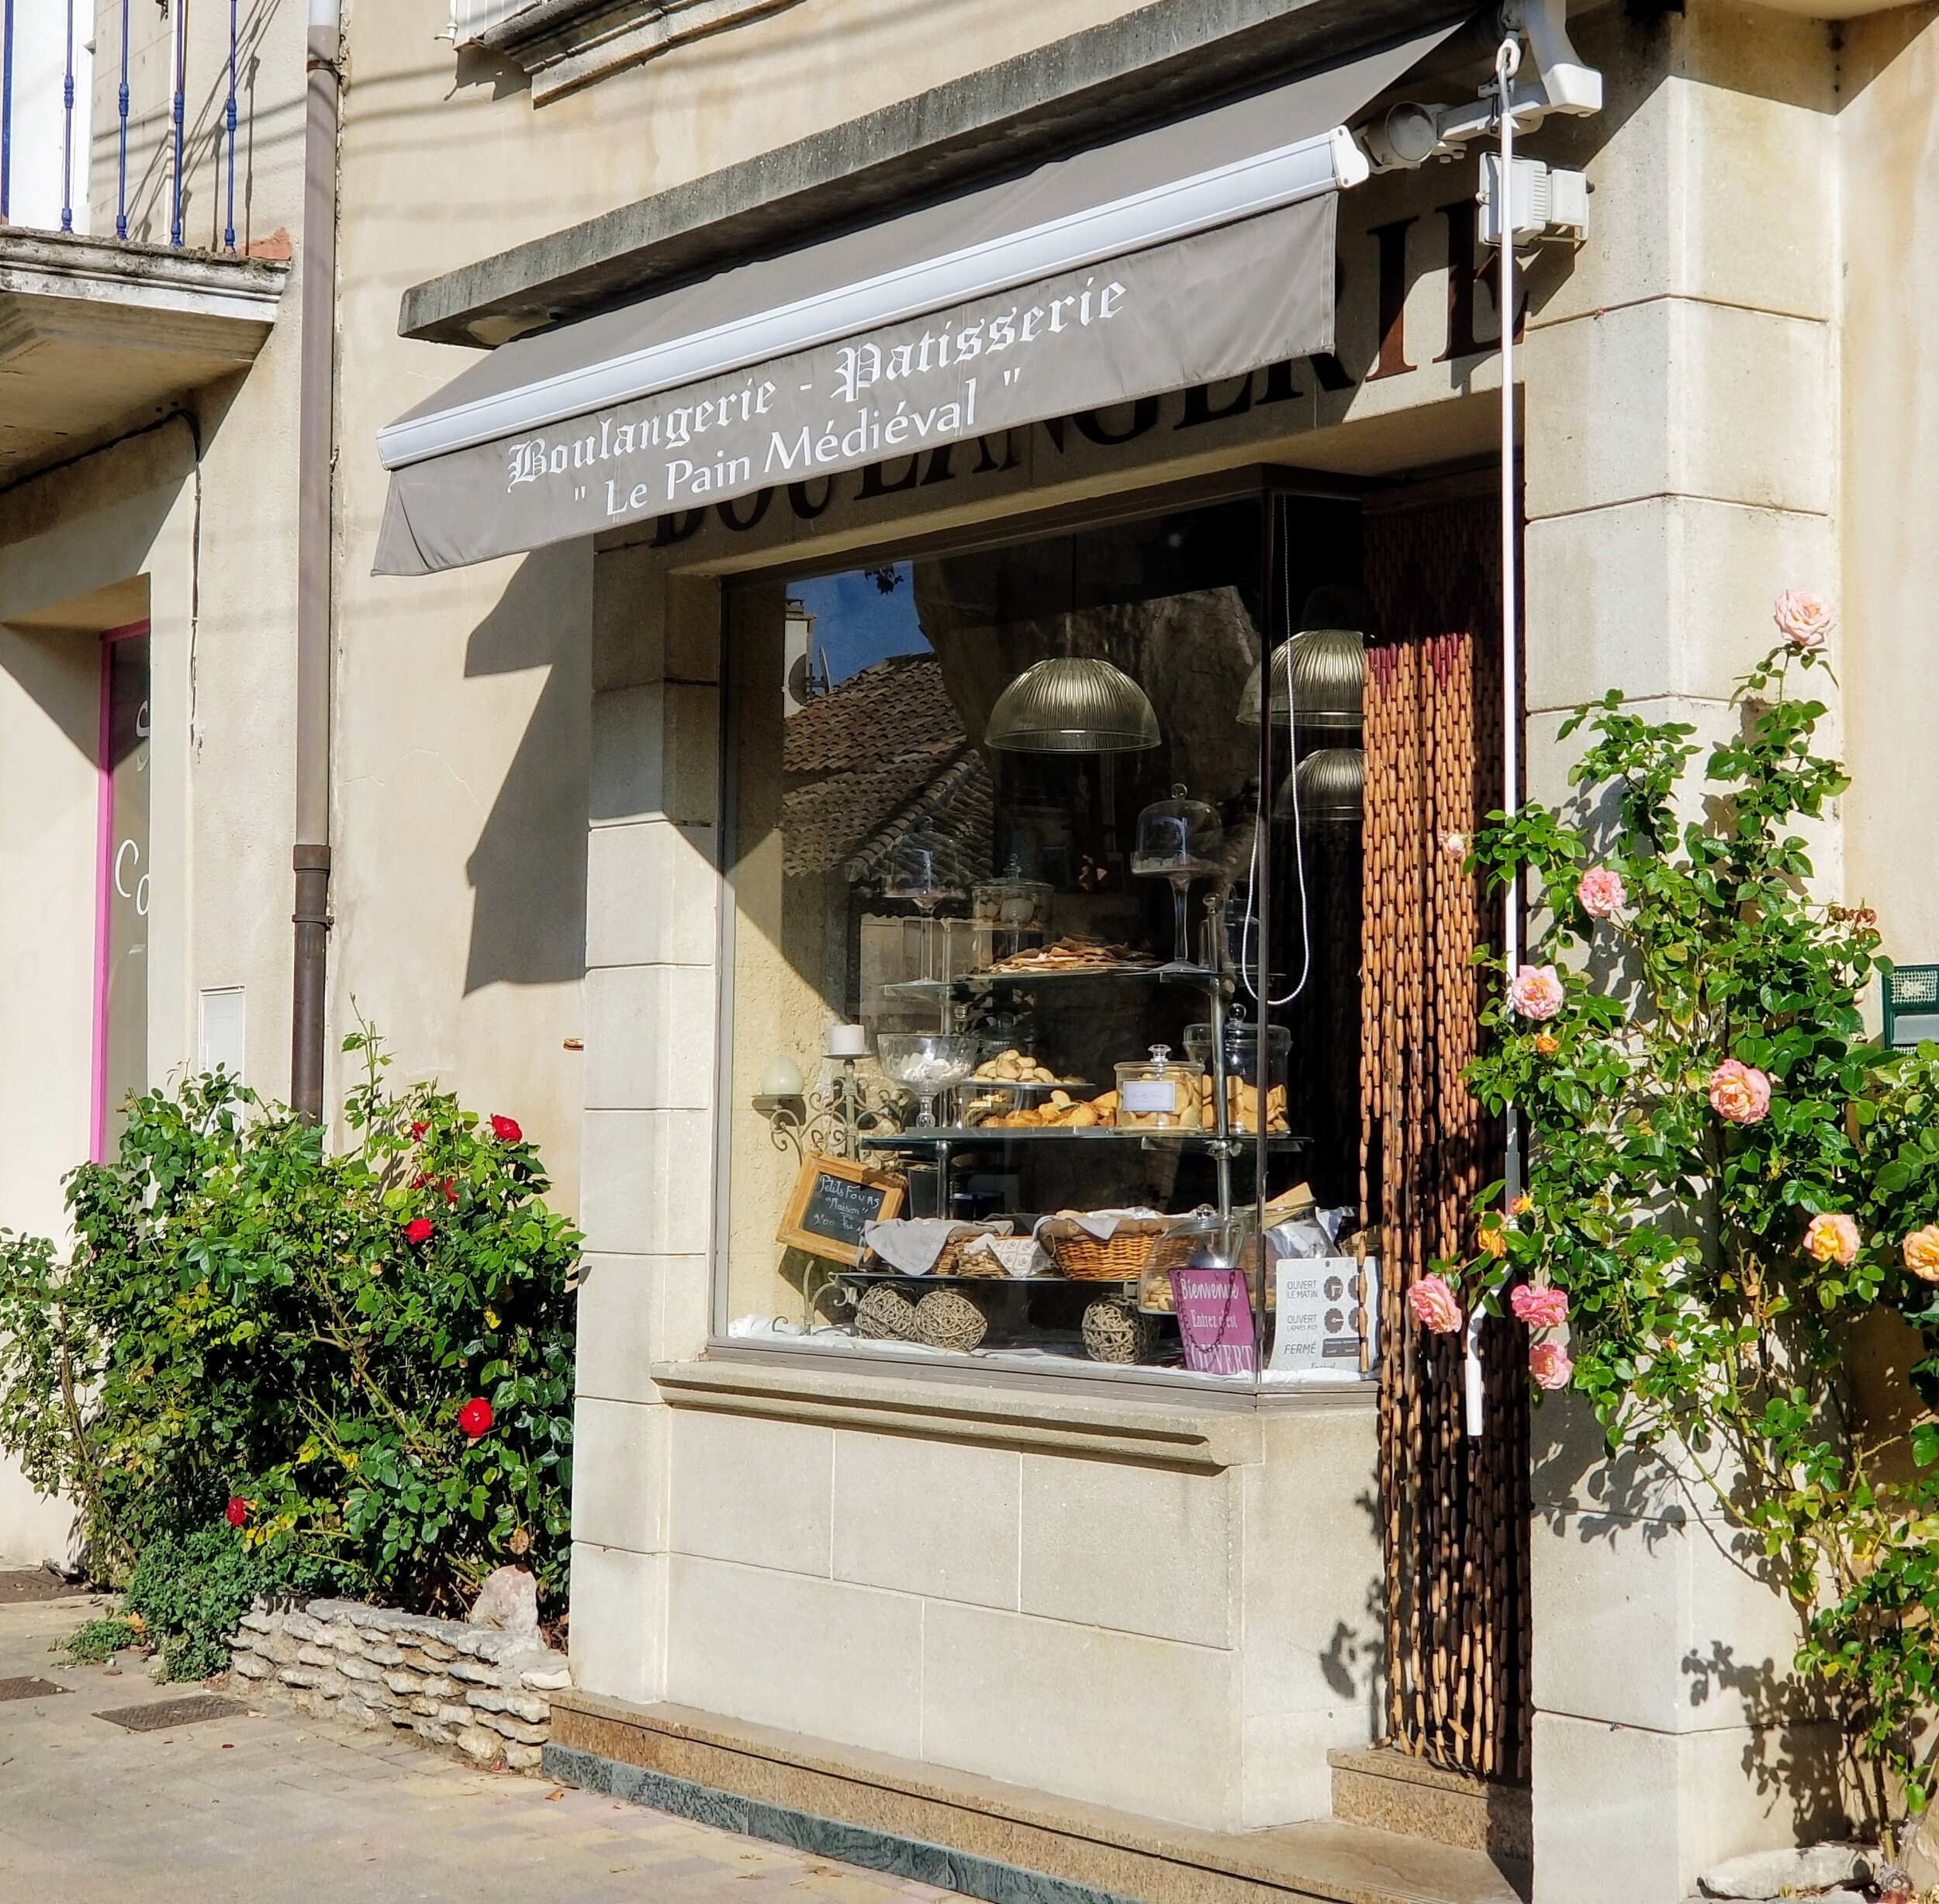 Sablet boulangerie nearest to our home